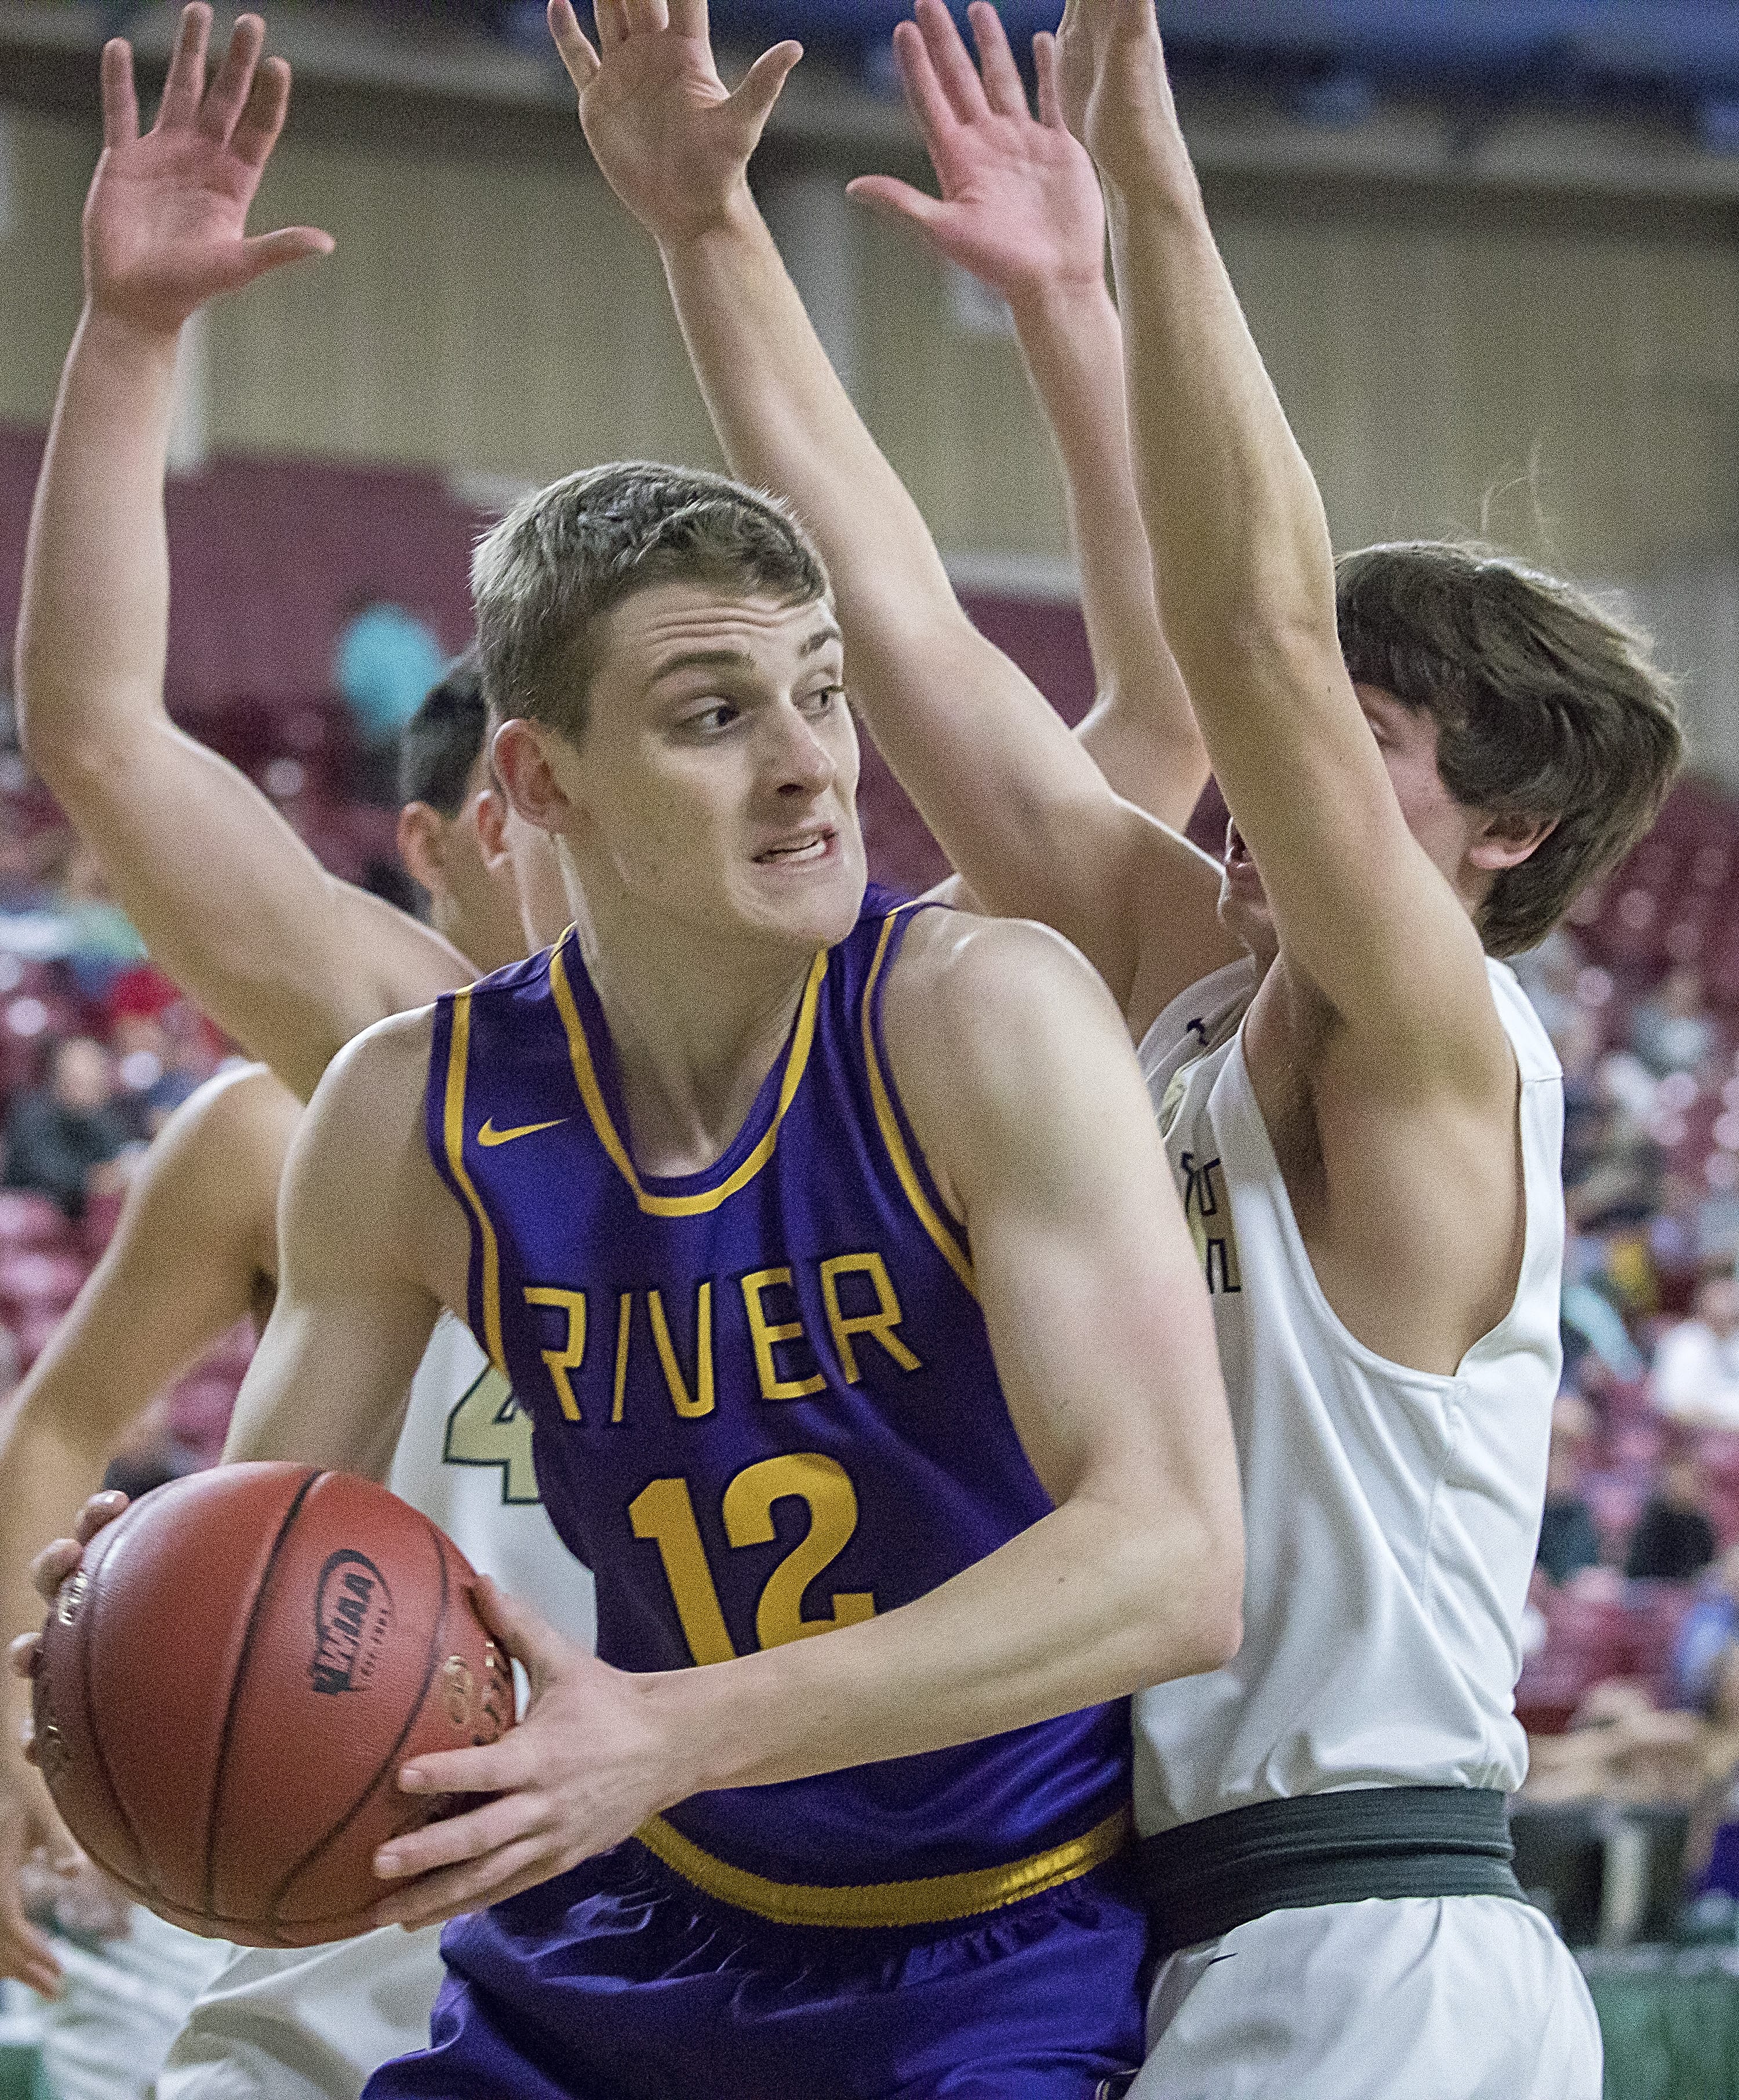 Columbia River’s Jacob Hjort (12) moves to pass around Selah’s Calvin Herting (3) in the WIAA 2A boys state basketball tournament on Saturday, Mar. 3, 2018, at the Yakima Valley SunDome. The Columbia River Chieftains took 6th place in state after losing to the The Selah Vikings 58-51.